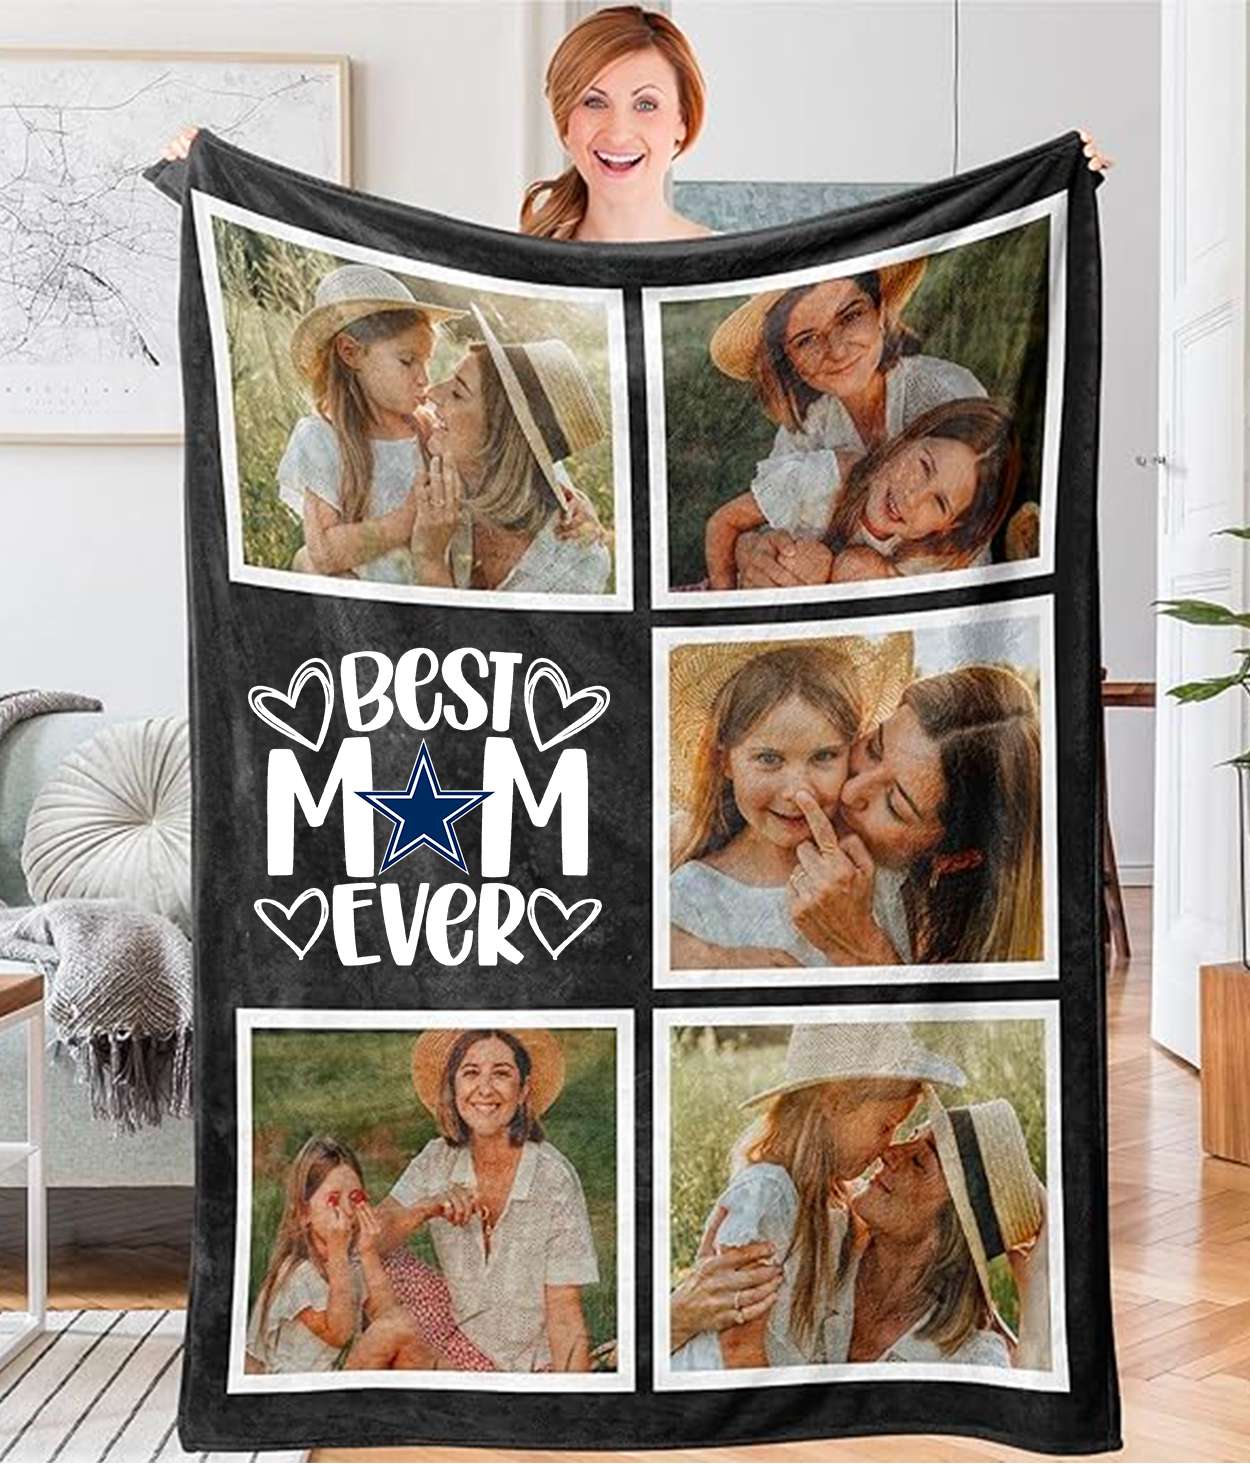 Best Mom Ever - Custom NFL Dallas Cowboys Blankets with Pictures for Mother's Day Gift